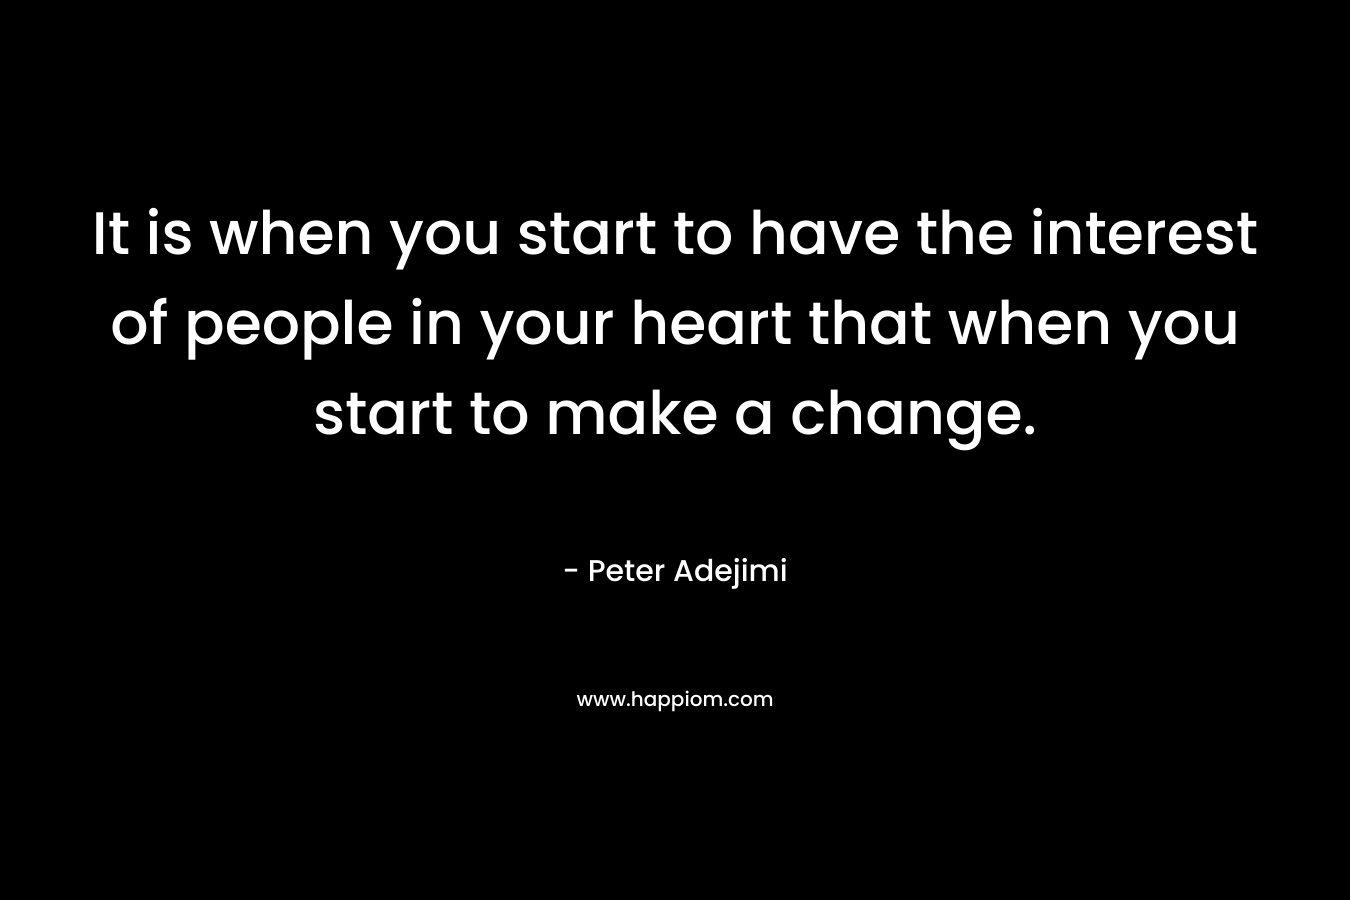 It is when you start to have the interest of people in your heart that when you start to make a change.